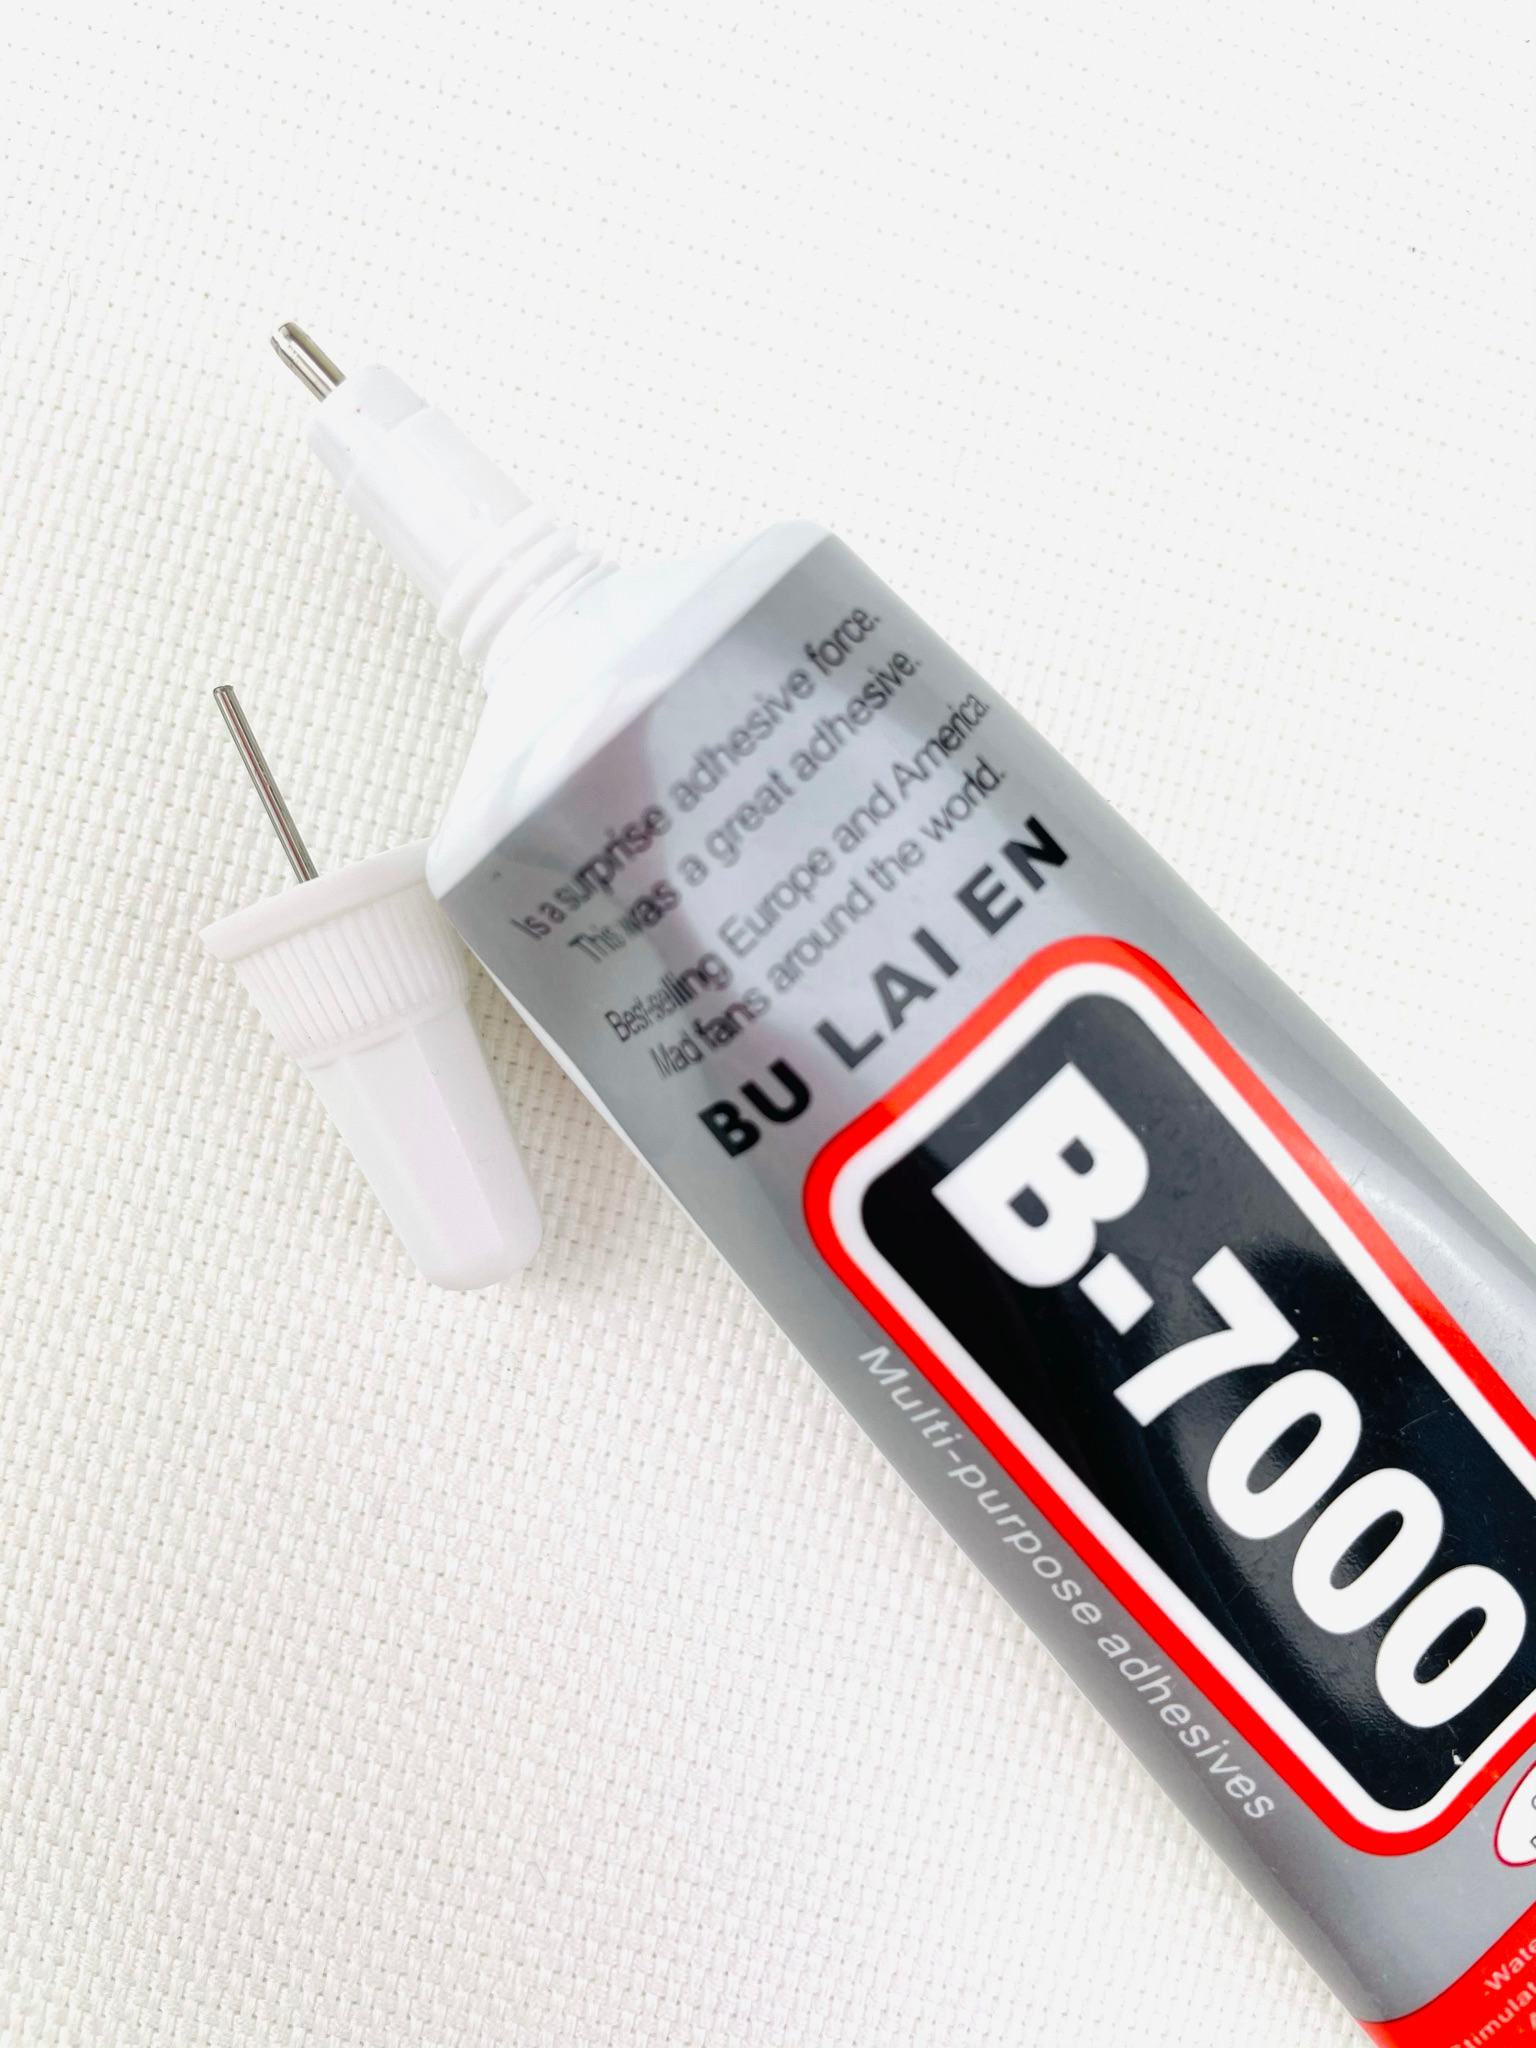 30ml Gem-tac Glue for Crystal Applying Needle Precision Tip Bottle Clothing  Crafts Banner DIY With 1 Wax Picker Pencil Free 